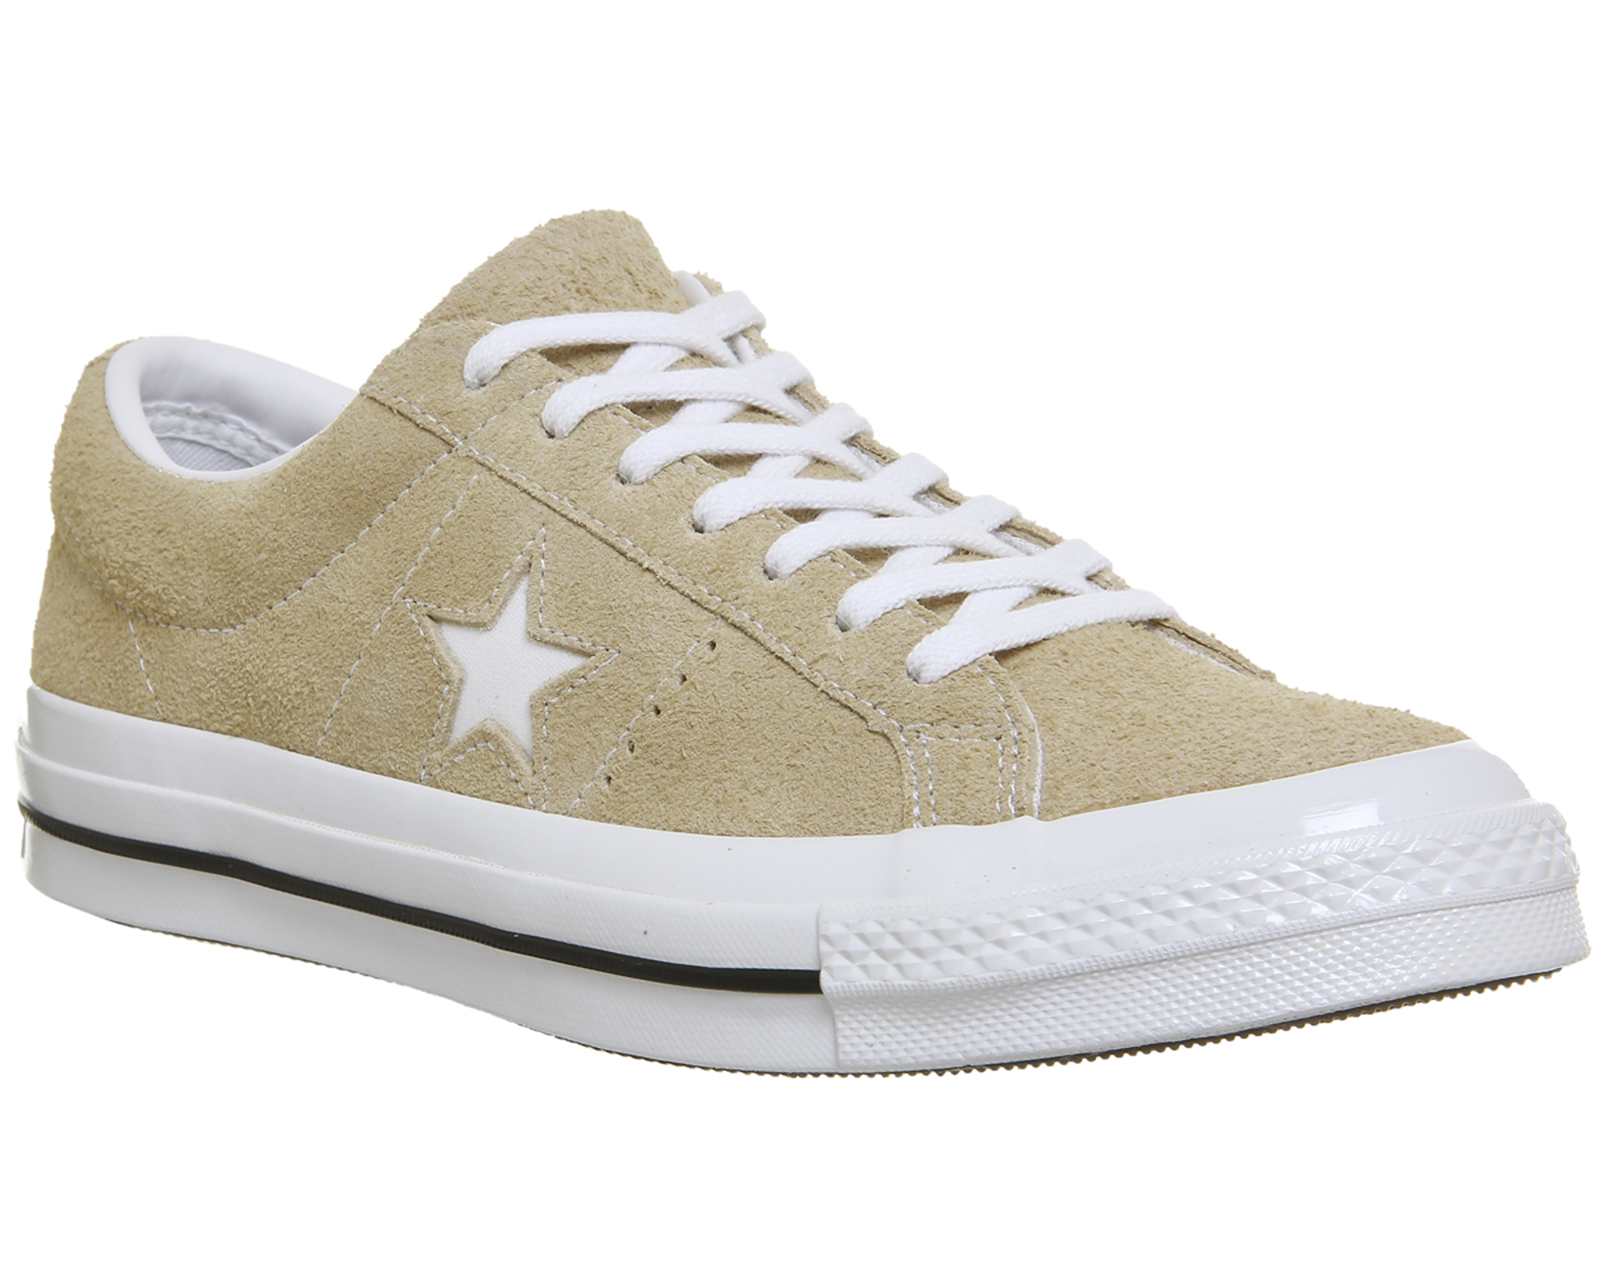 Converse One Star Vintage Khaki White - Hers trainers